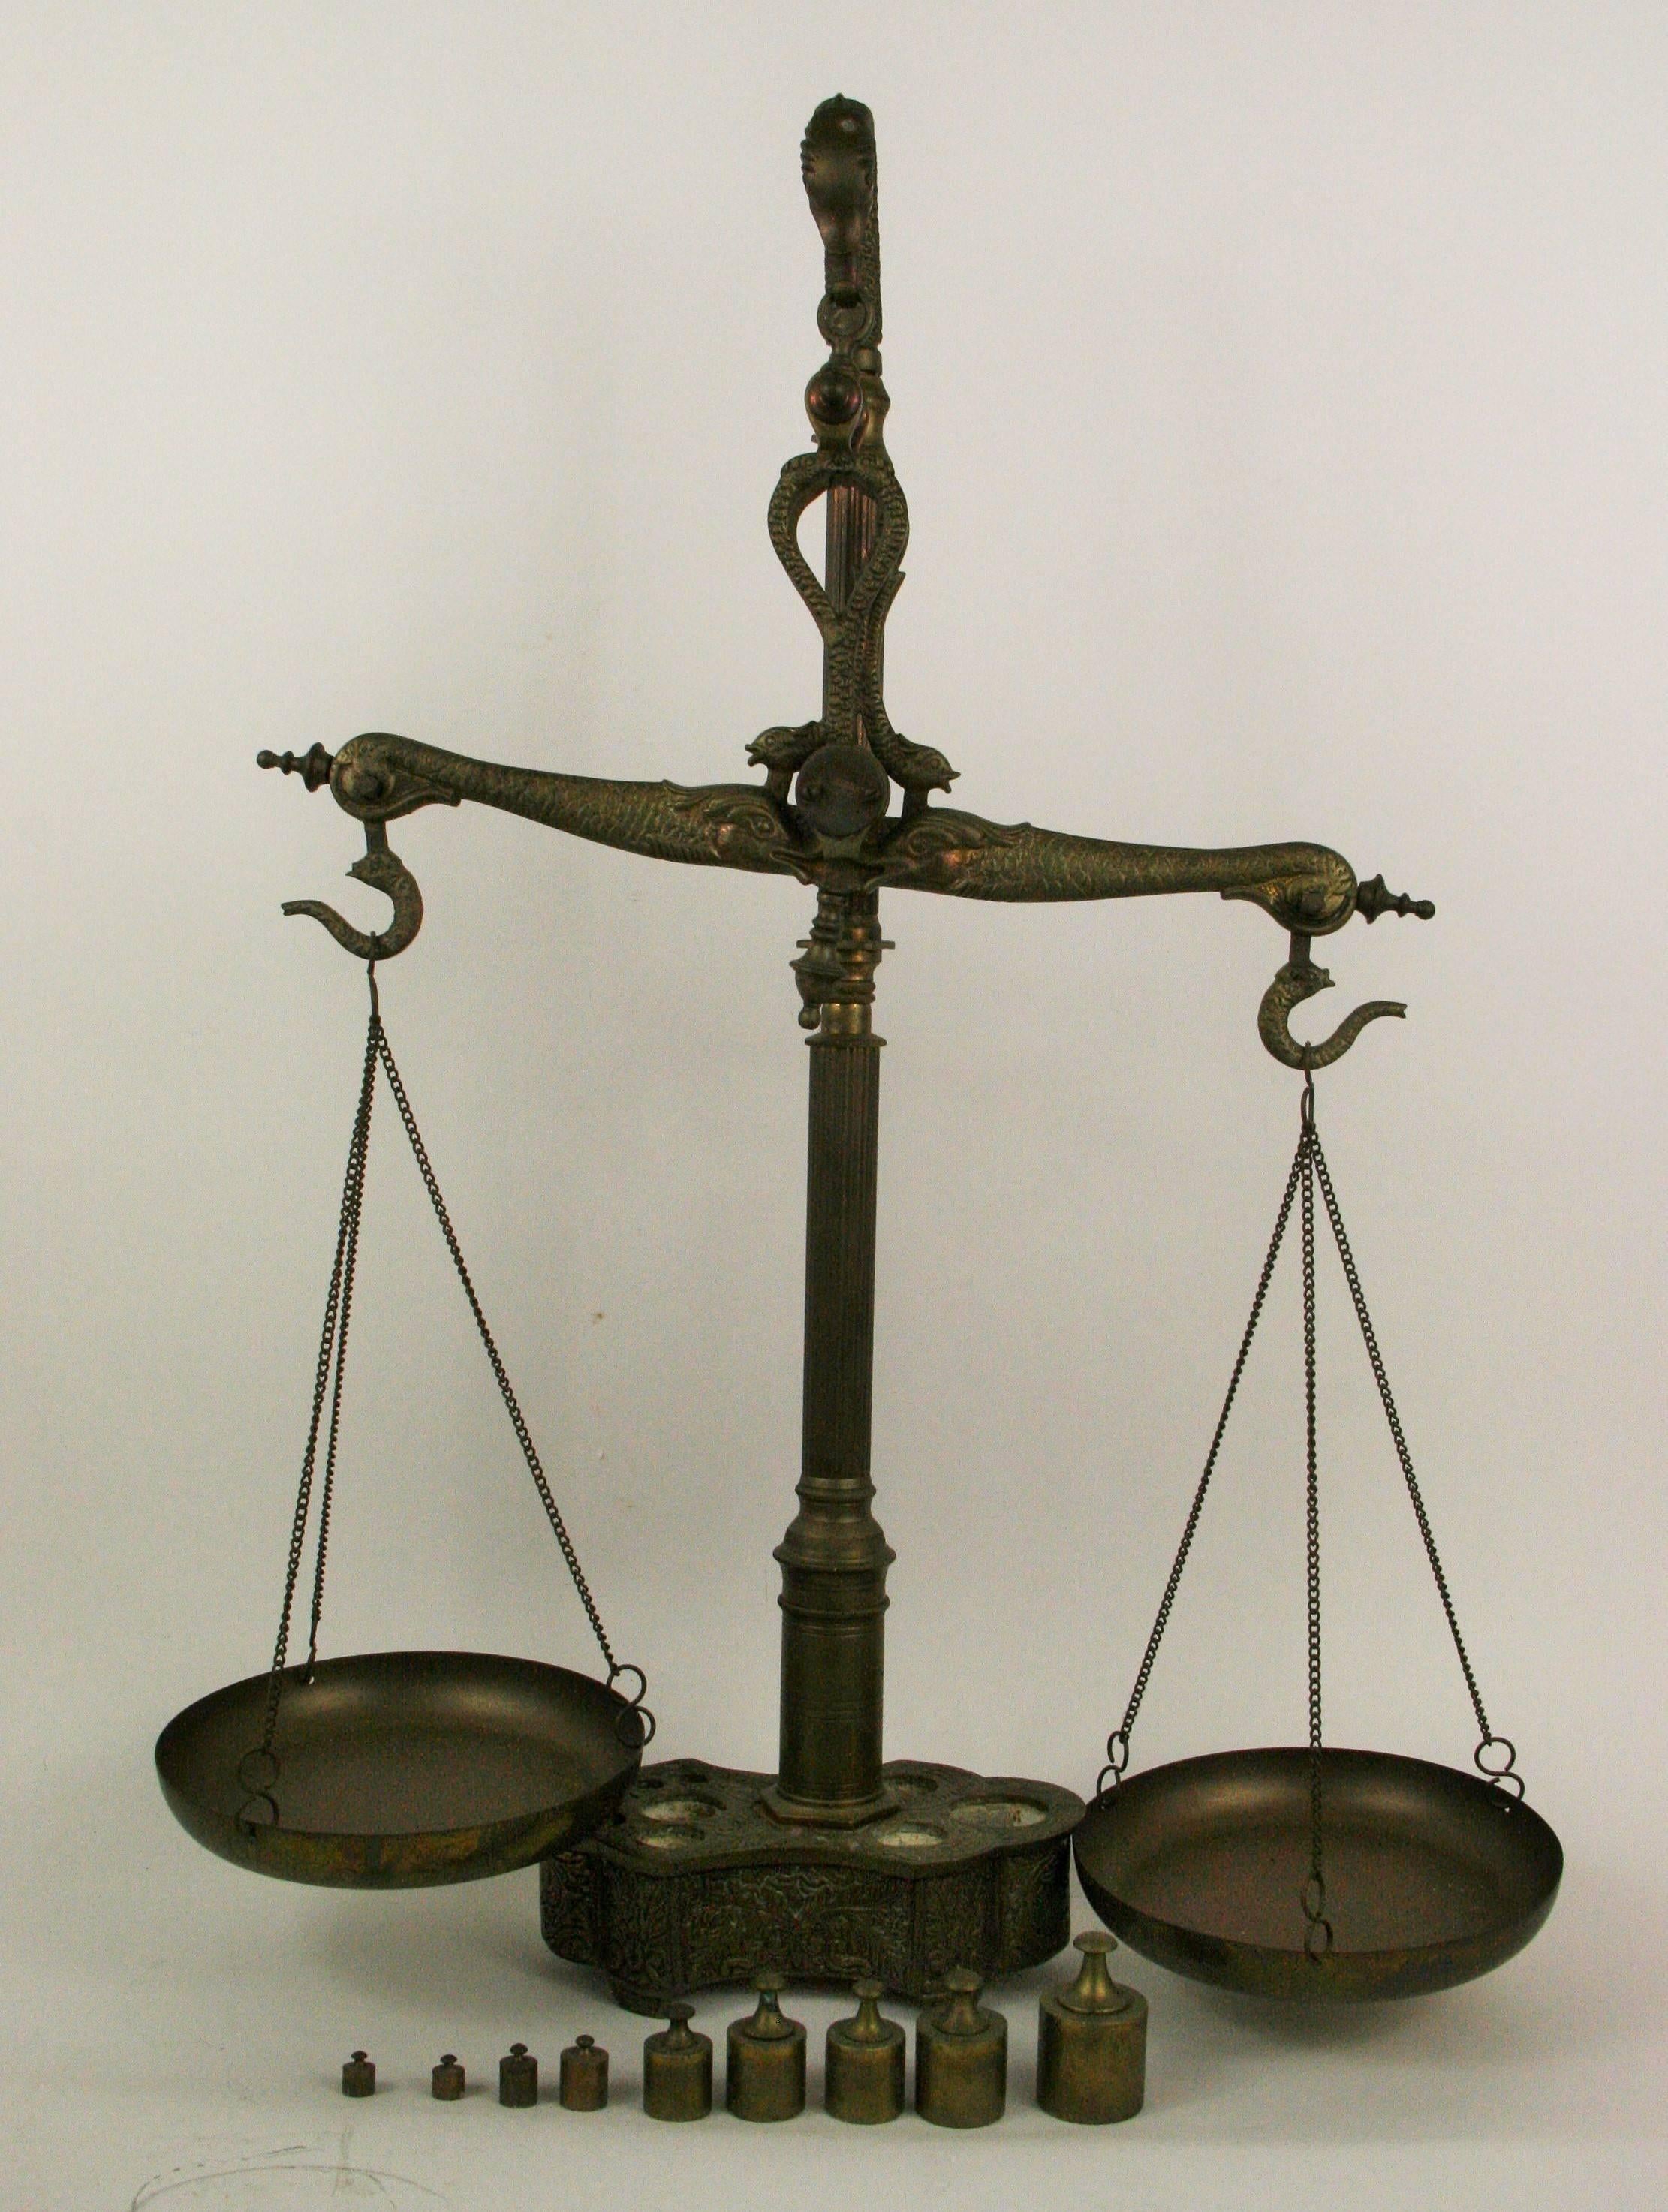 9-176 Intricately detailed brass balance scale with weights (weights fit in solid brass base) made in Portugal.